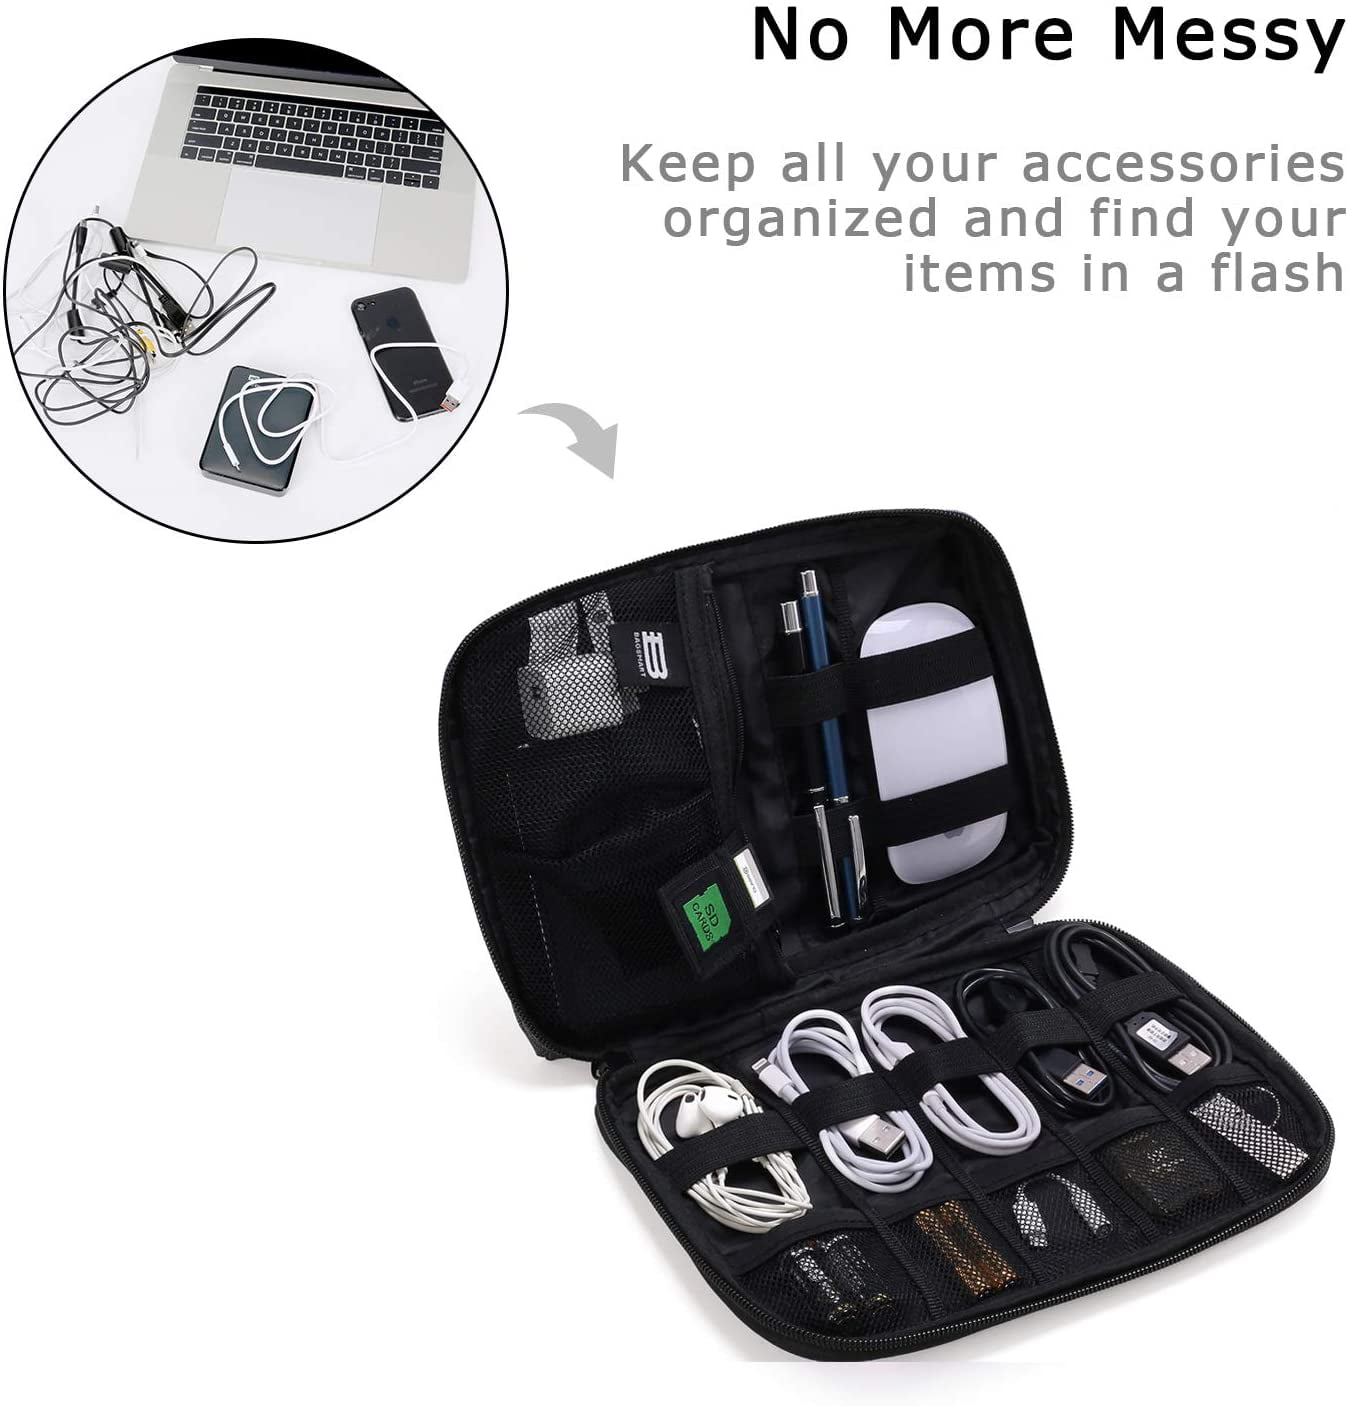 USB Cable BAGSMART Small Travel Electronics Cable Organiser Bag for Hard Drives Black Cables SD Card